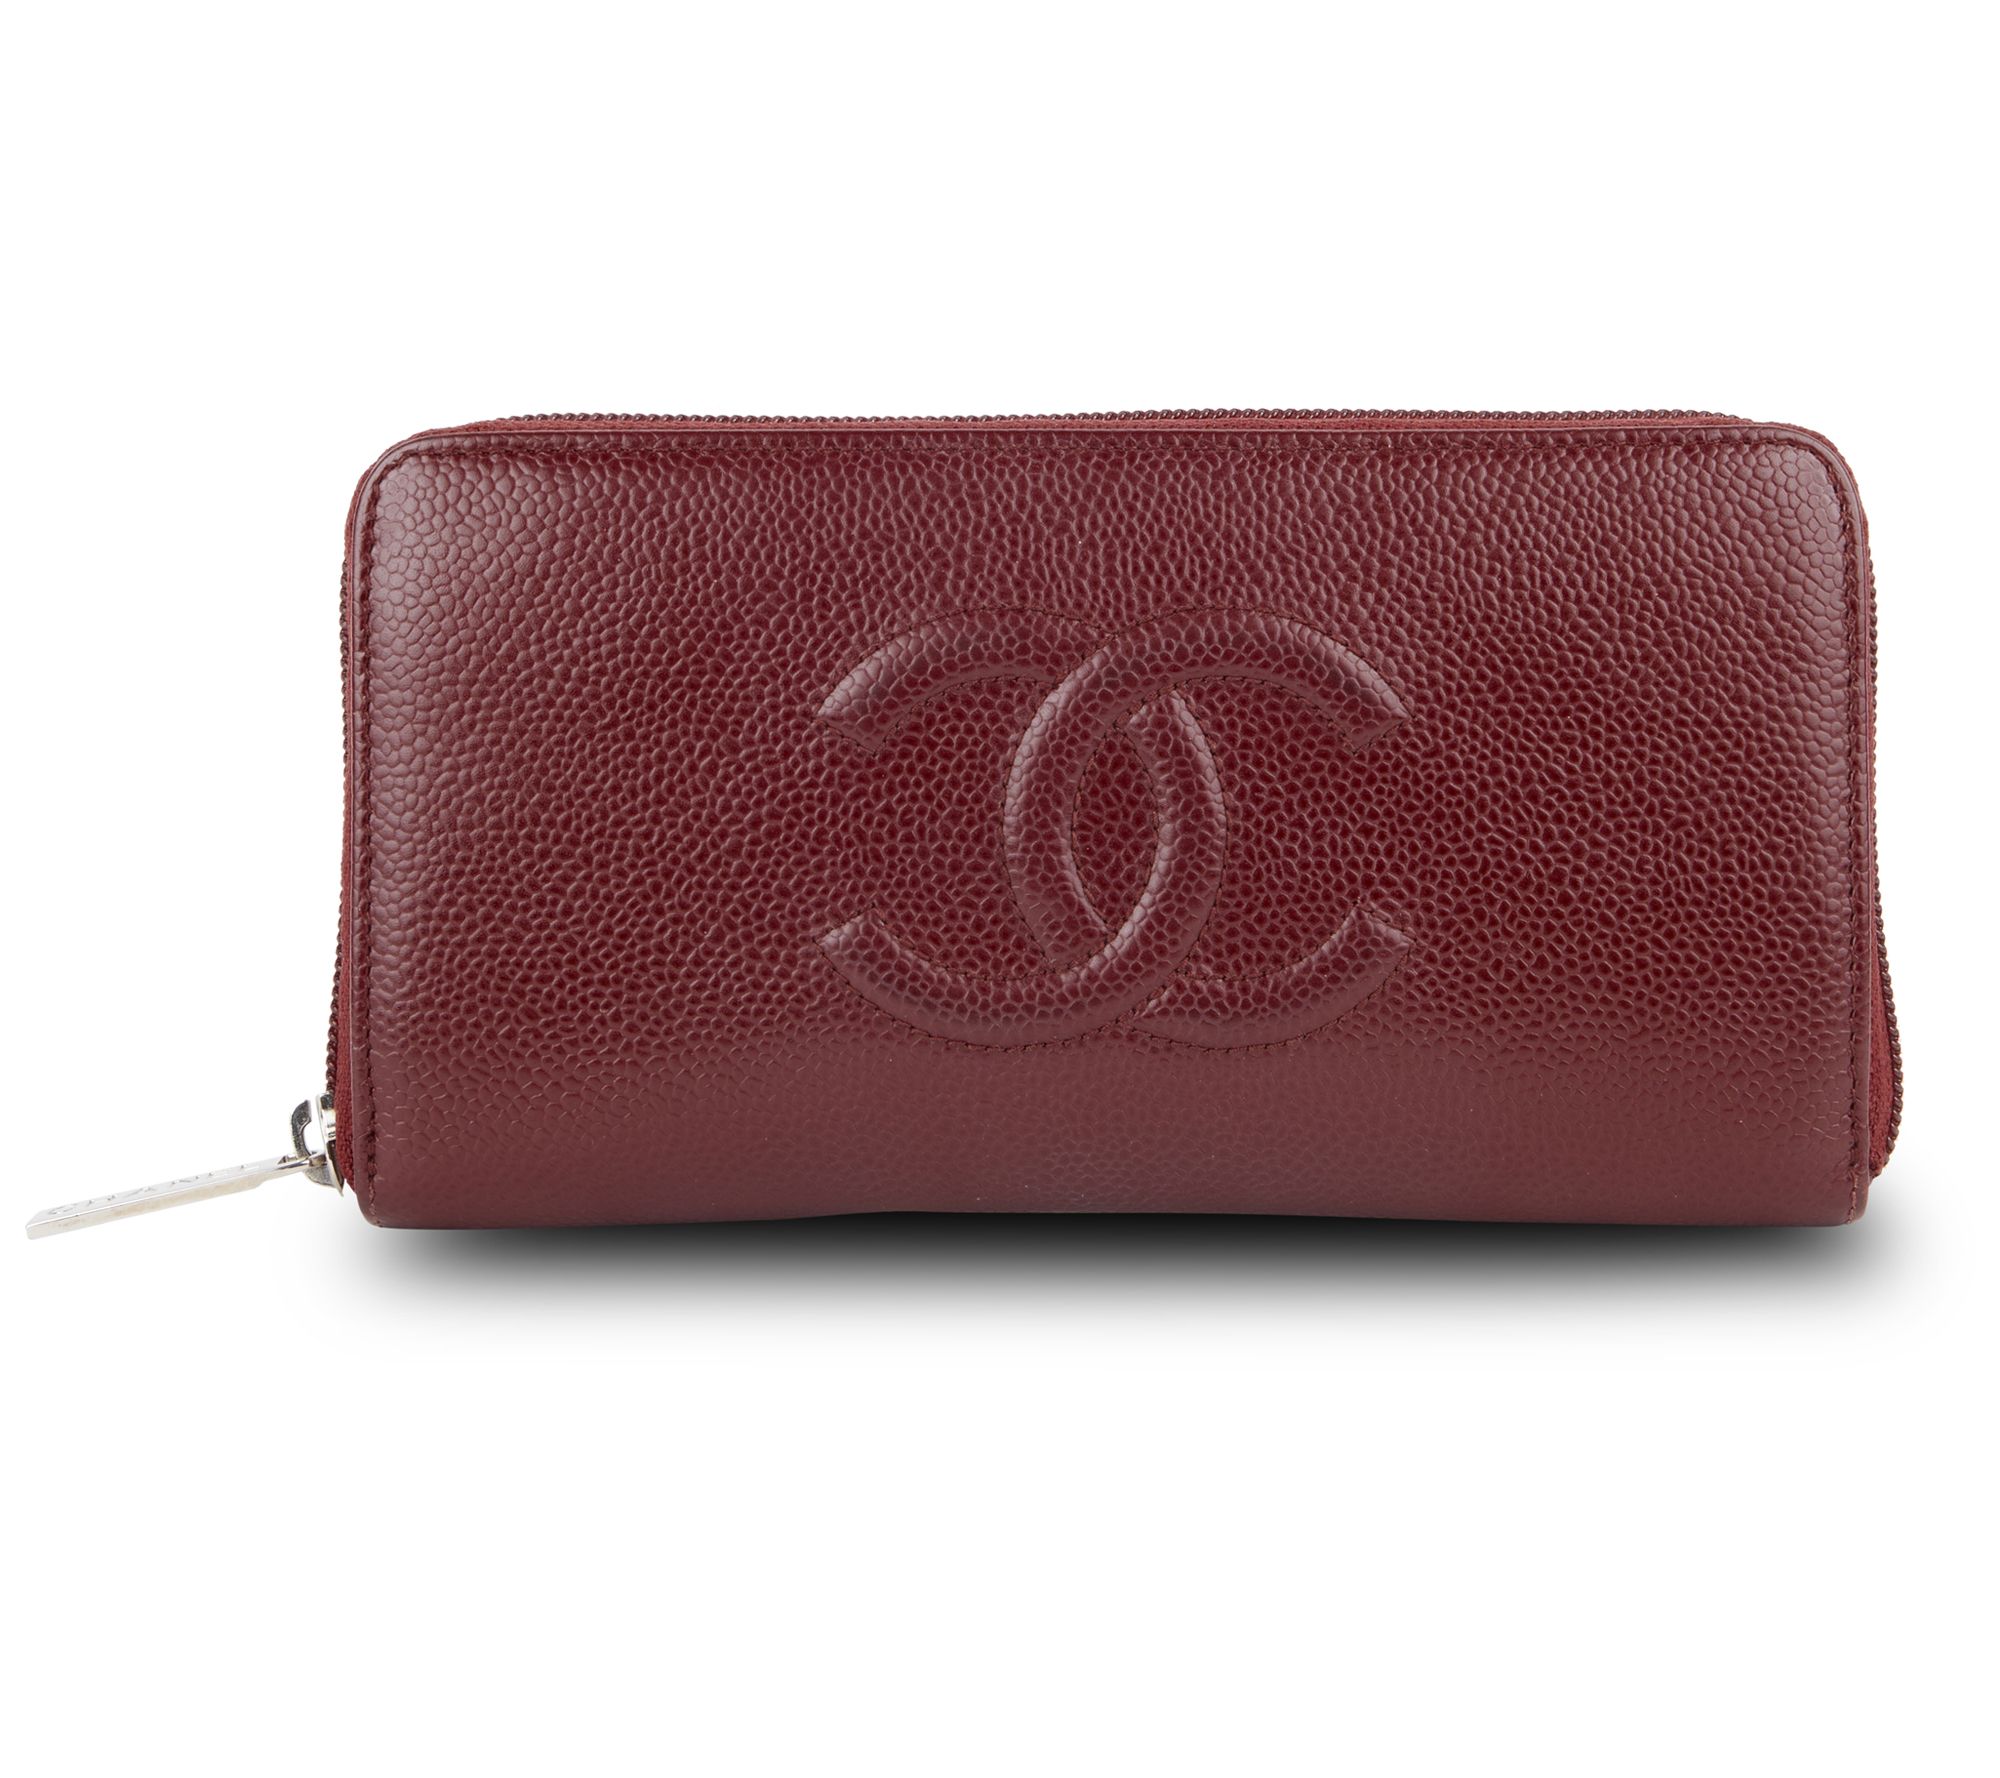 Chanel - Authenticated Wallet on Chain Timeless/Classique Handbag - Leather Red for Women, Good Condition